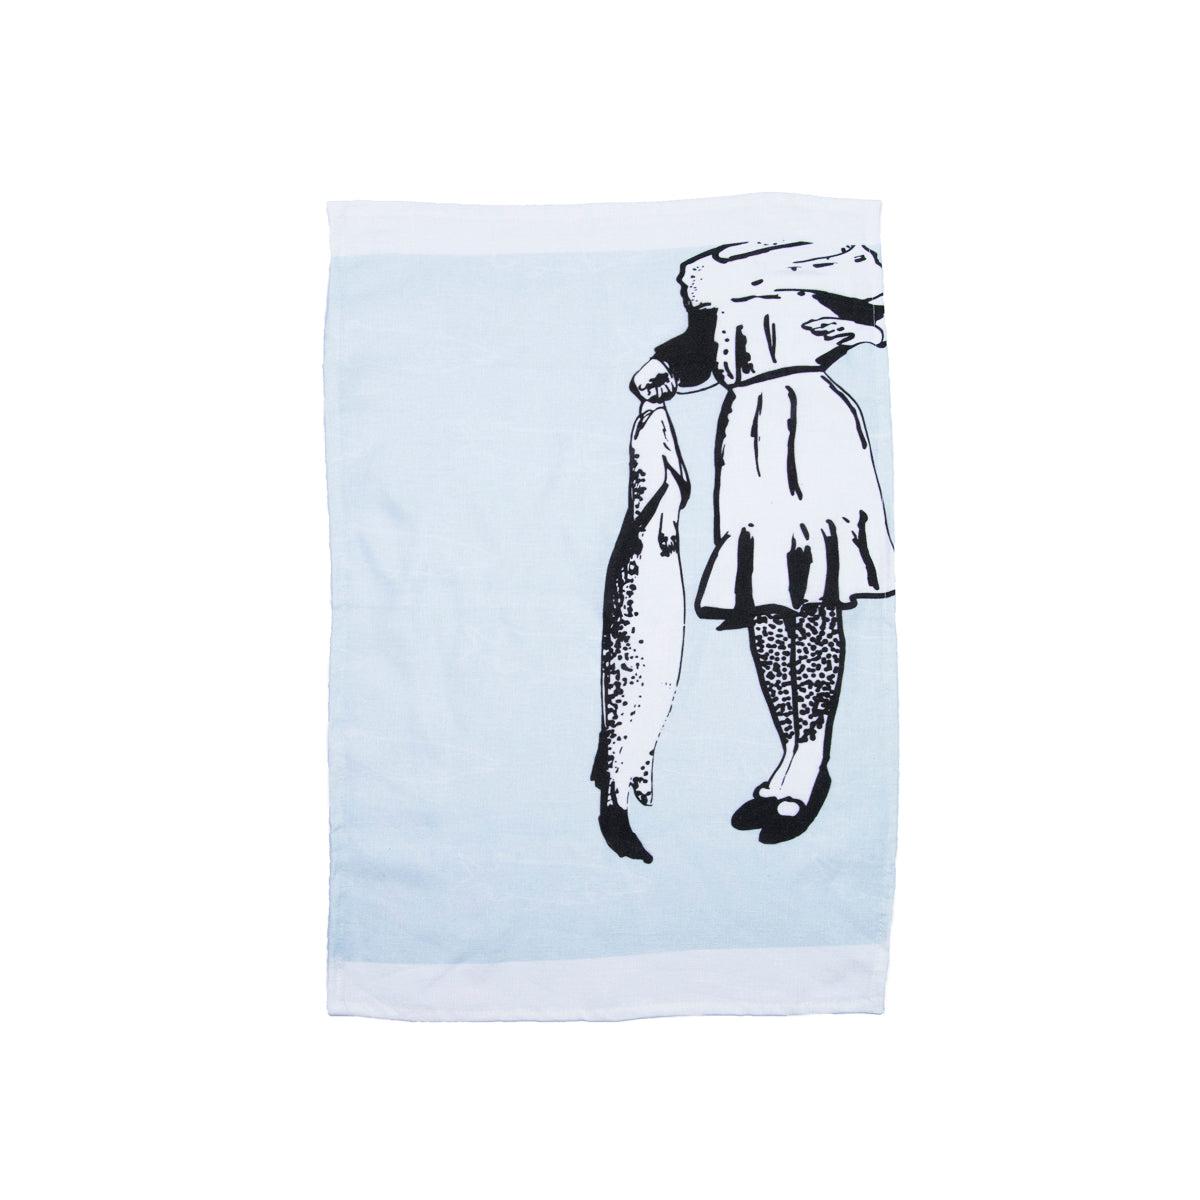 16" x 24" 100% linen tea towel in light blue with an illustration of a girl holding a fish